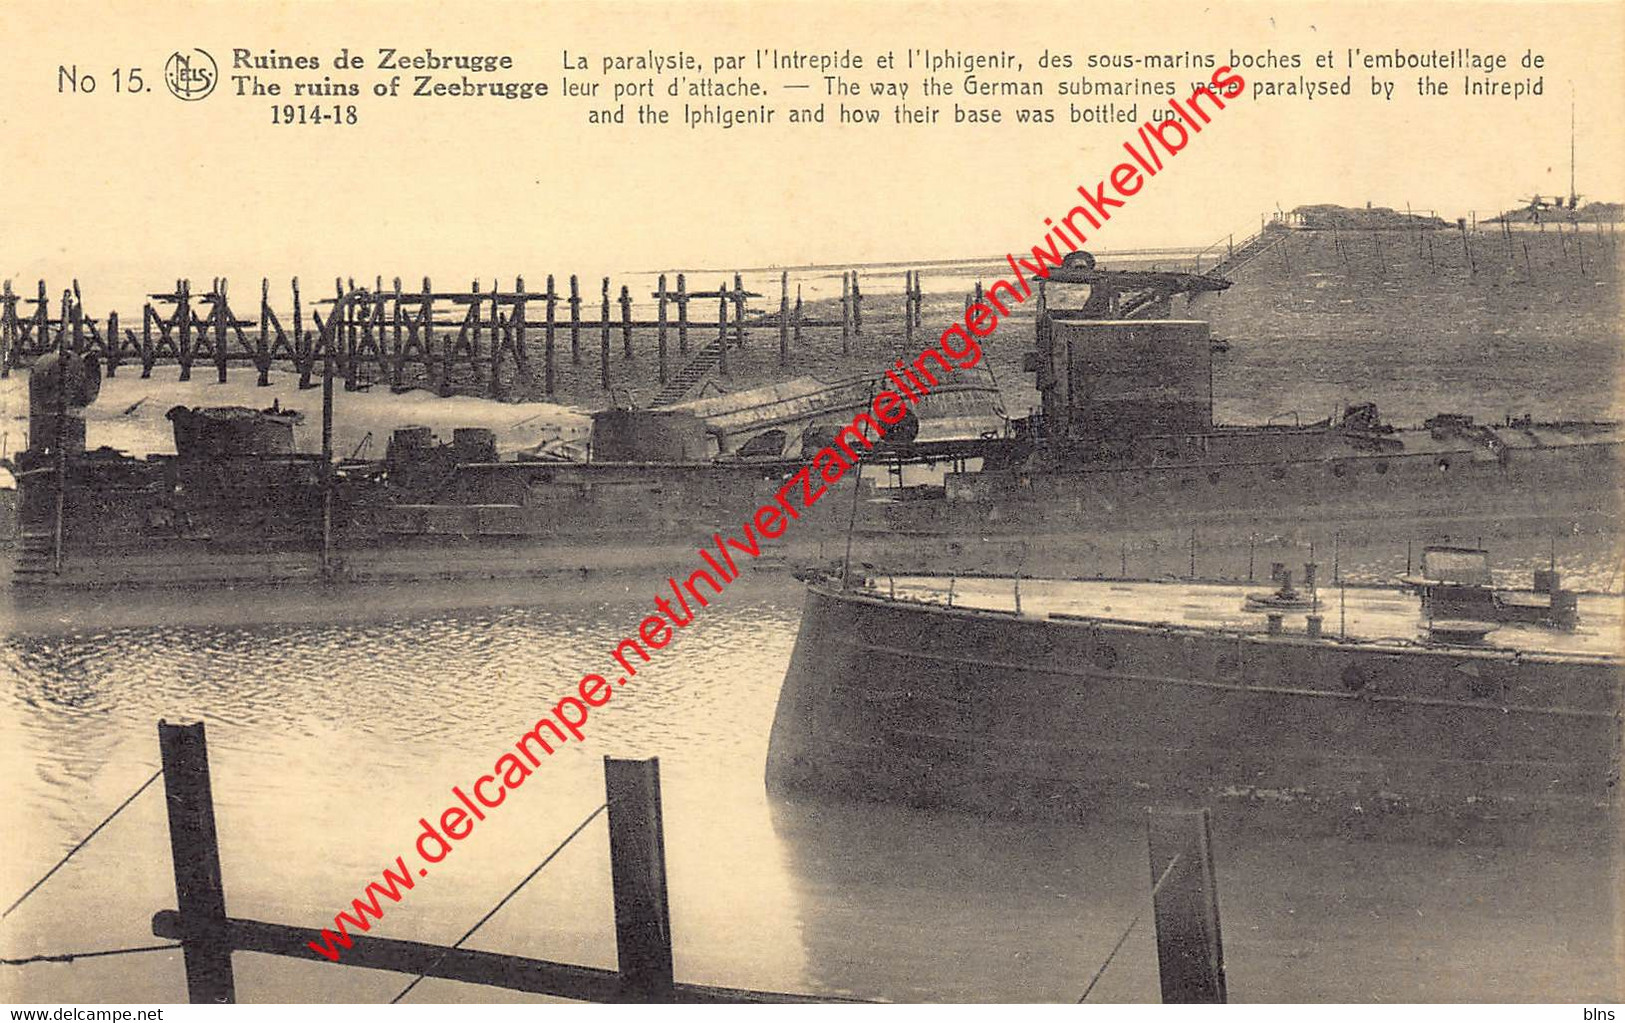 The Way The German Submarines Were Paralysed By The Intrepid And The Iphigenir - Zeebrugge - Zeebrugge